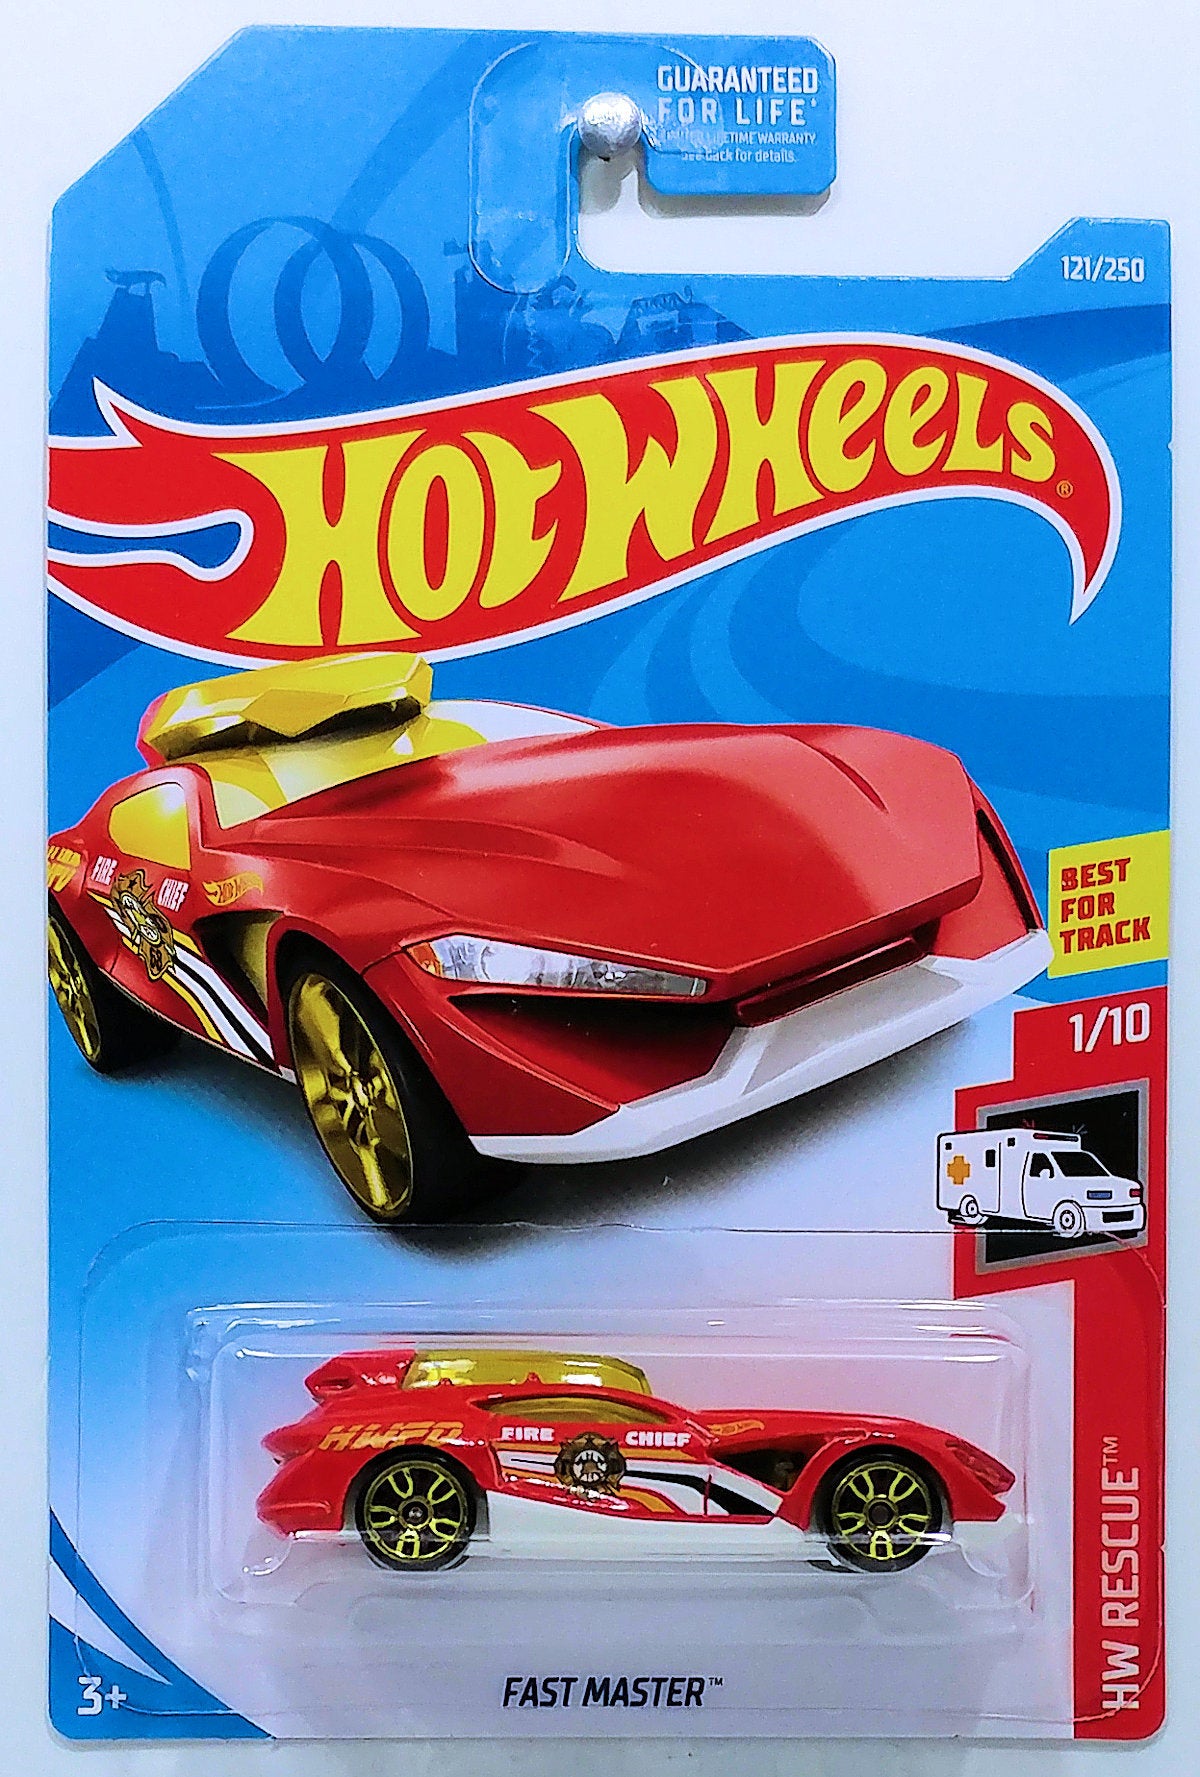 Hot Wheels 2019 - Collector # 121/250 - HW Rescue 1/10 - Fast Master - Red